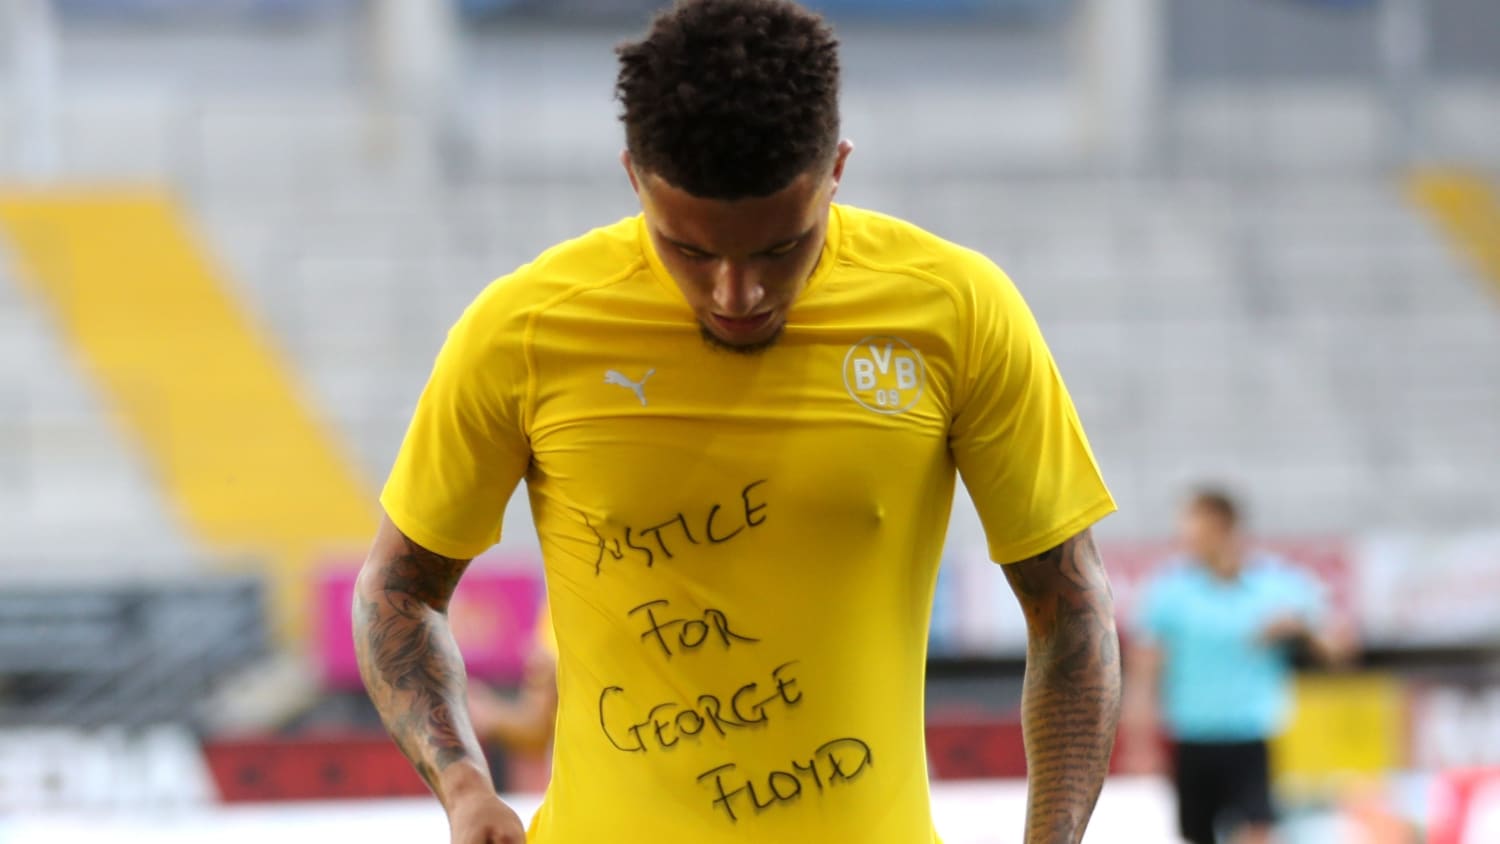 European soccer player reveals 'Justice for George Floyd' message after scoring goal